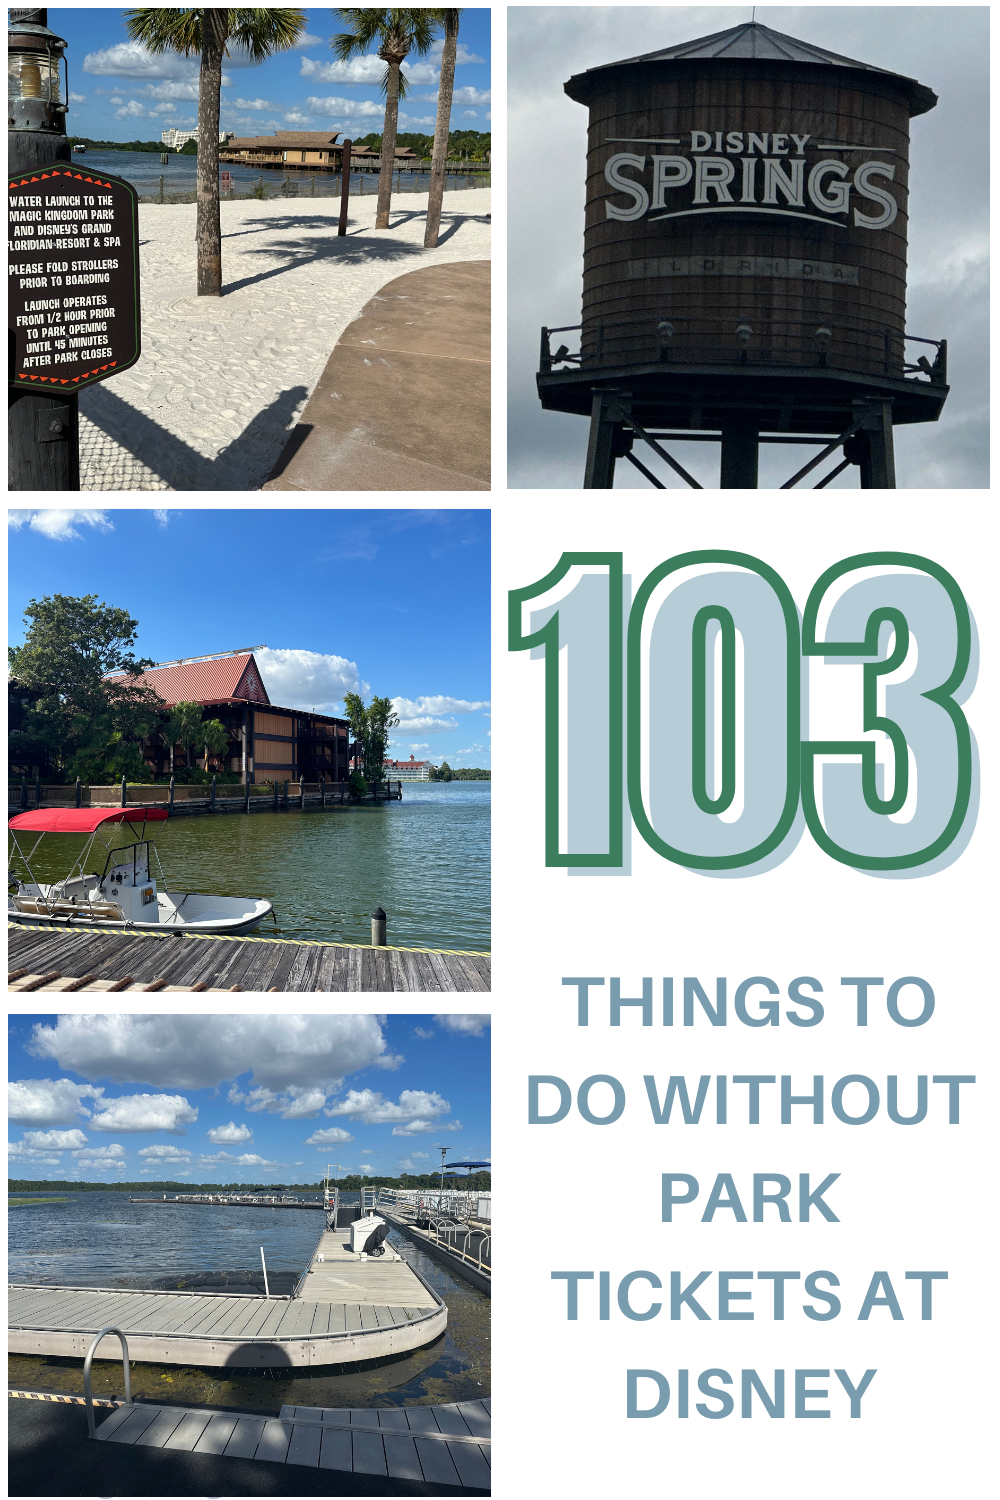 There are so many things to do around Disney World without having a park ticket. There are many restaurants, activities, and shopping along with day trips in the Orlando area. Check out this complete list of 103 things to do without a park ticket at Disney.